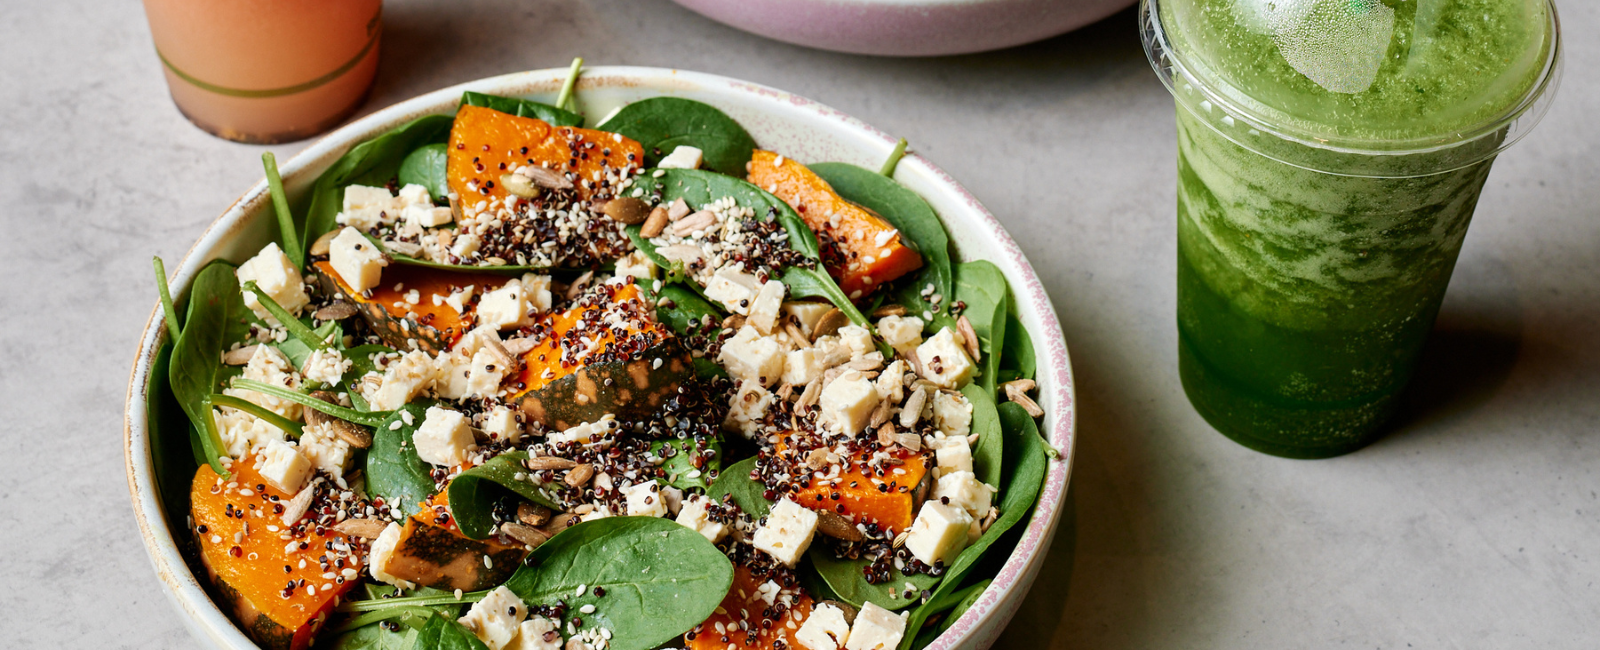 Pumpkin salad from Seeds by Bruno Loubet